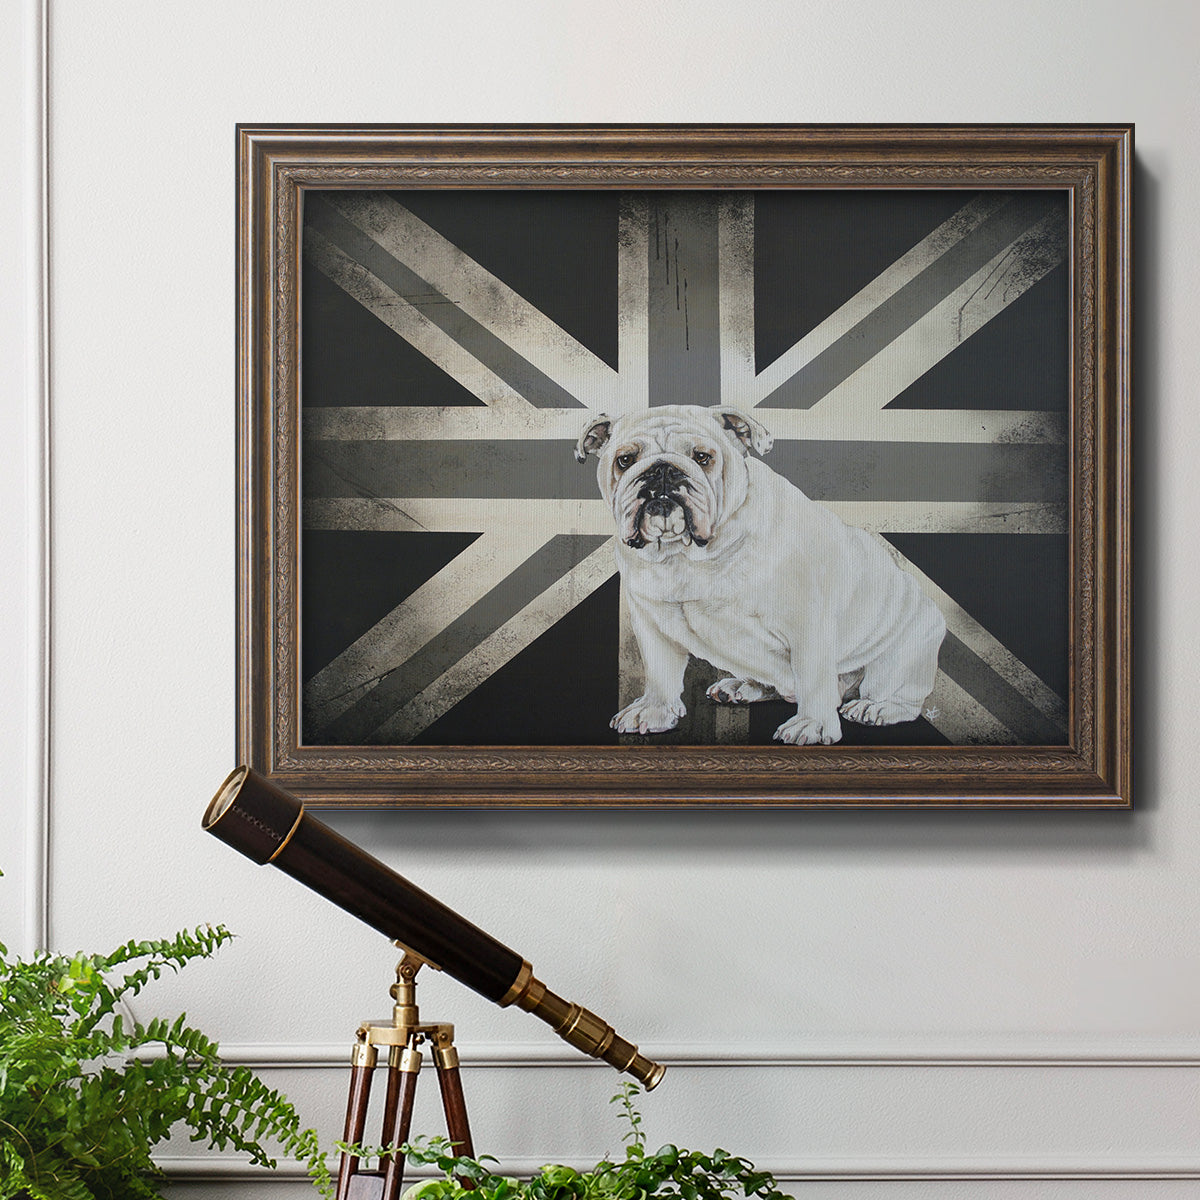 Best of British B&W Premium Framed Canvas- Ready to Hang